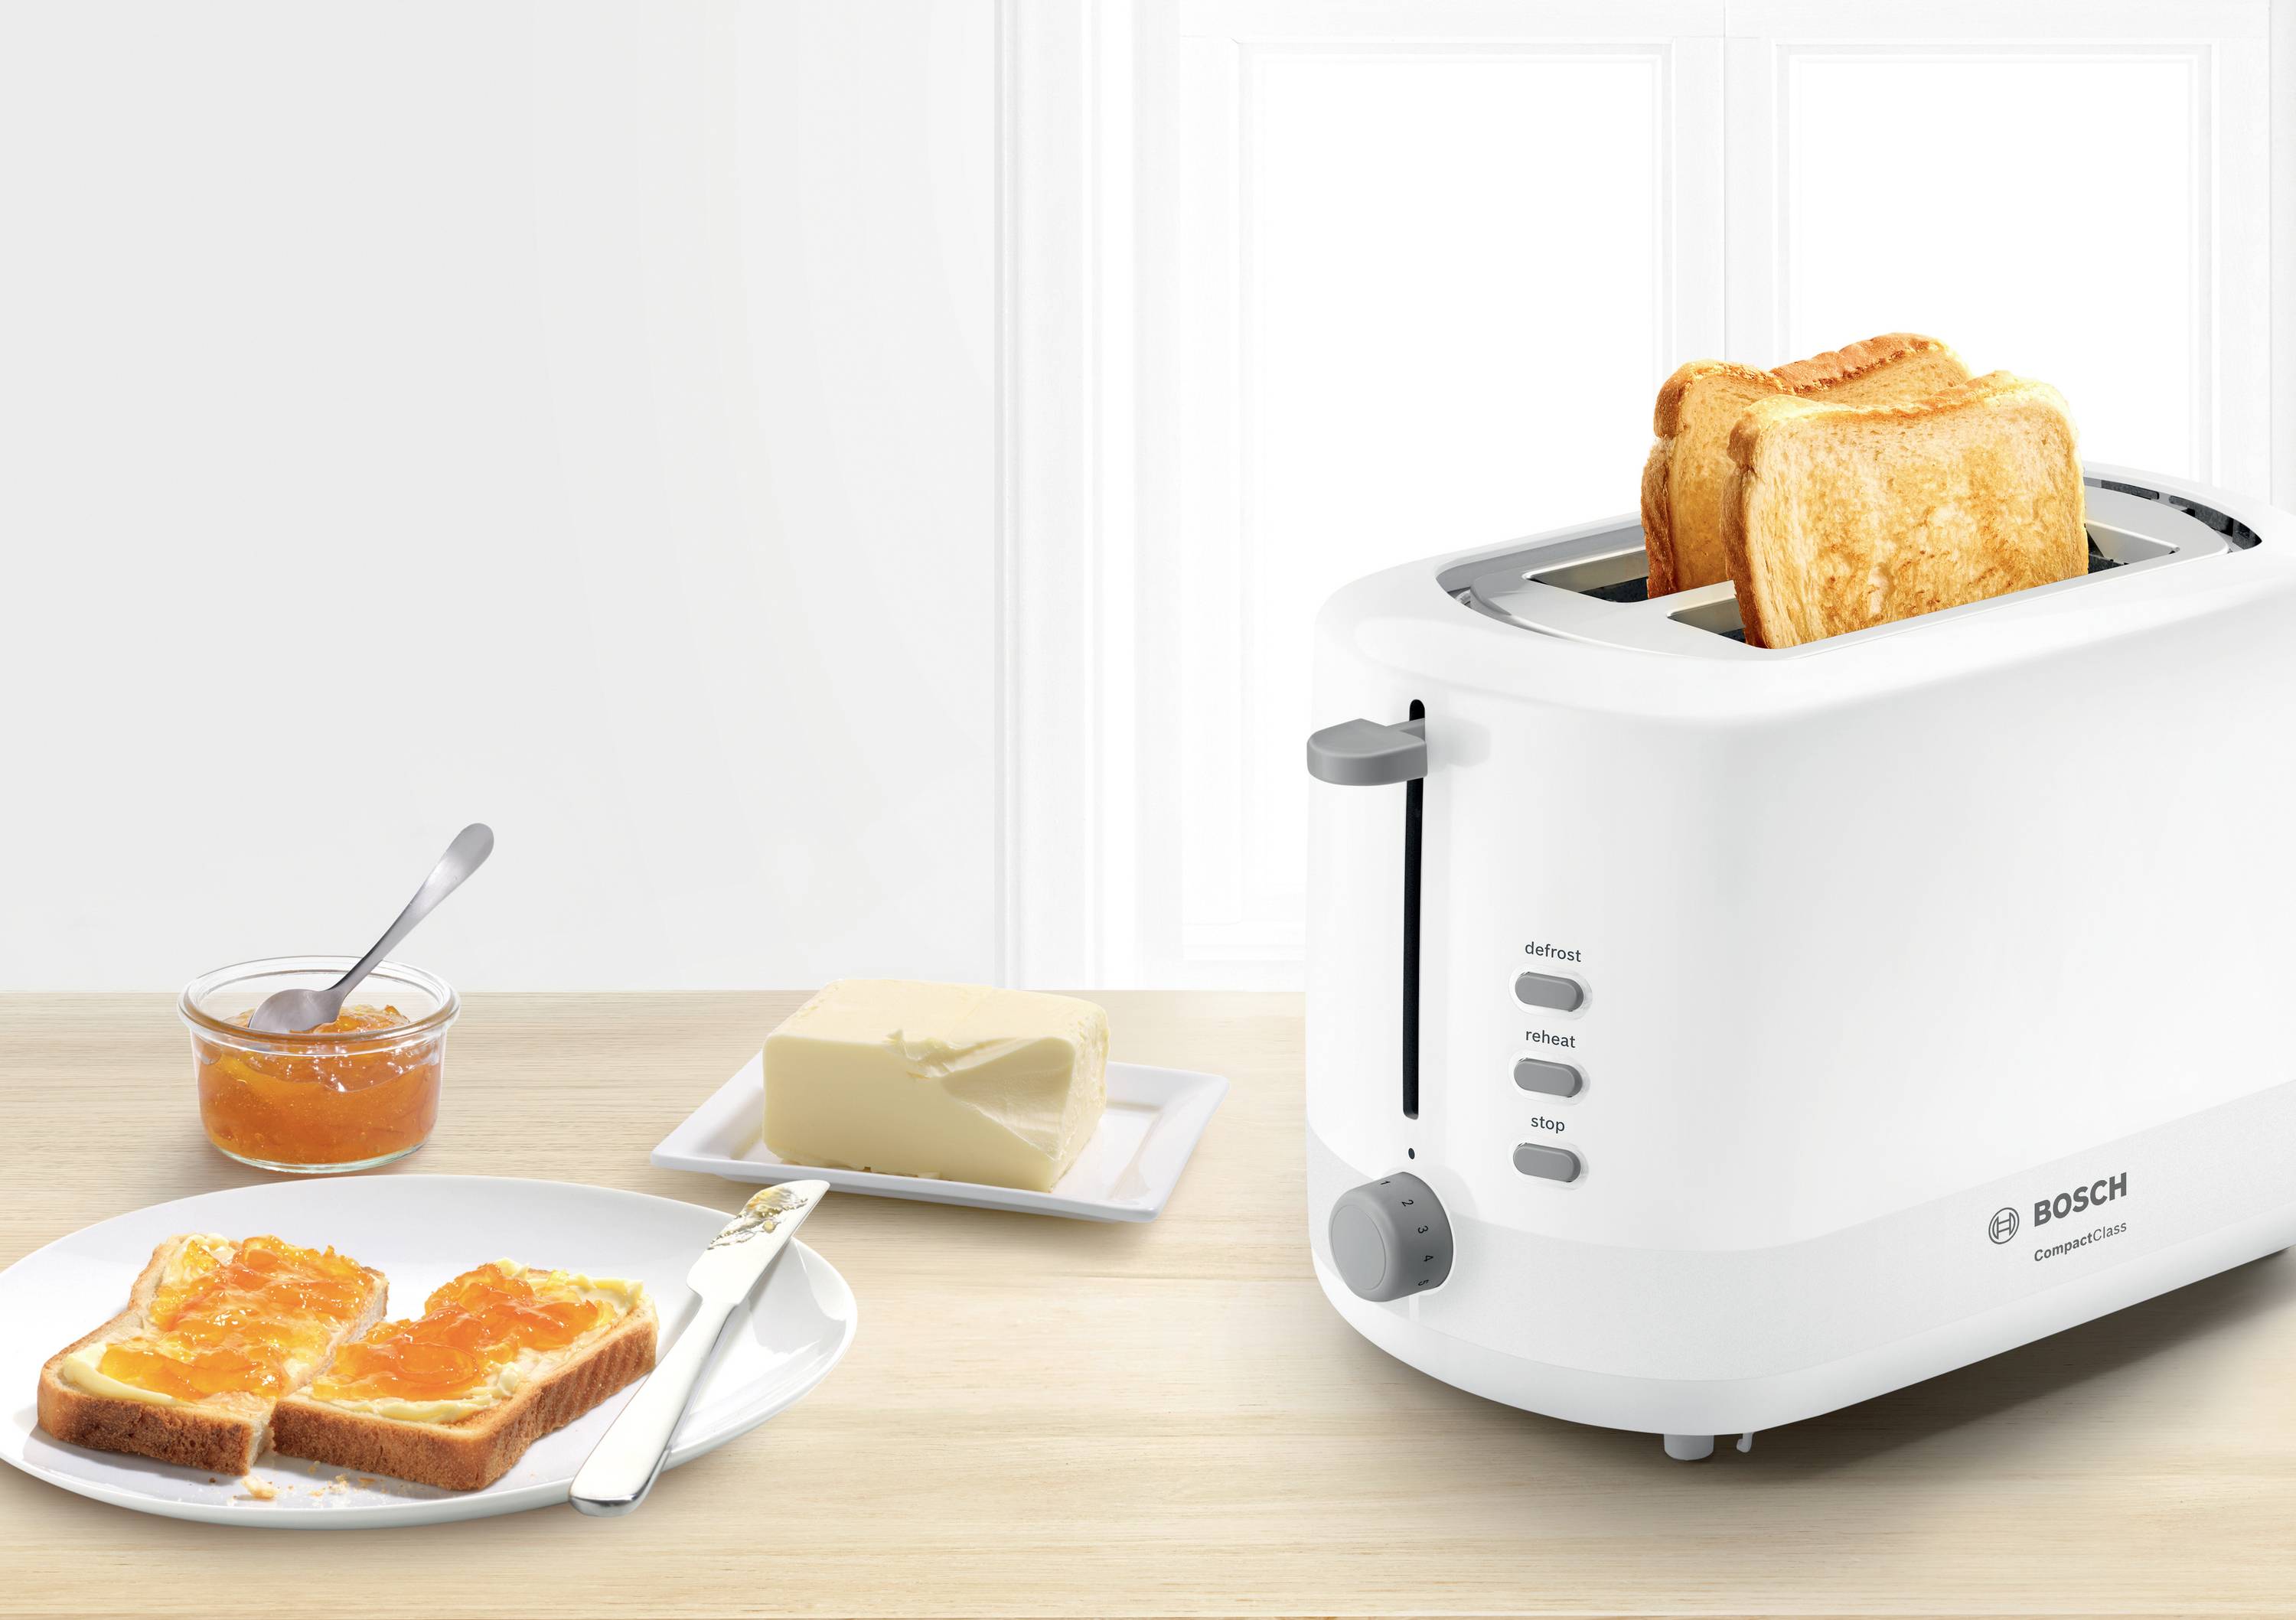 Home 47% Attachment, Bosch Haushalt Toaster With OFF TAT6A513 Baking